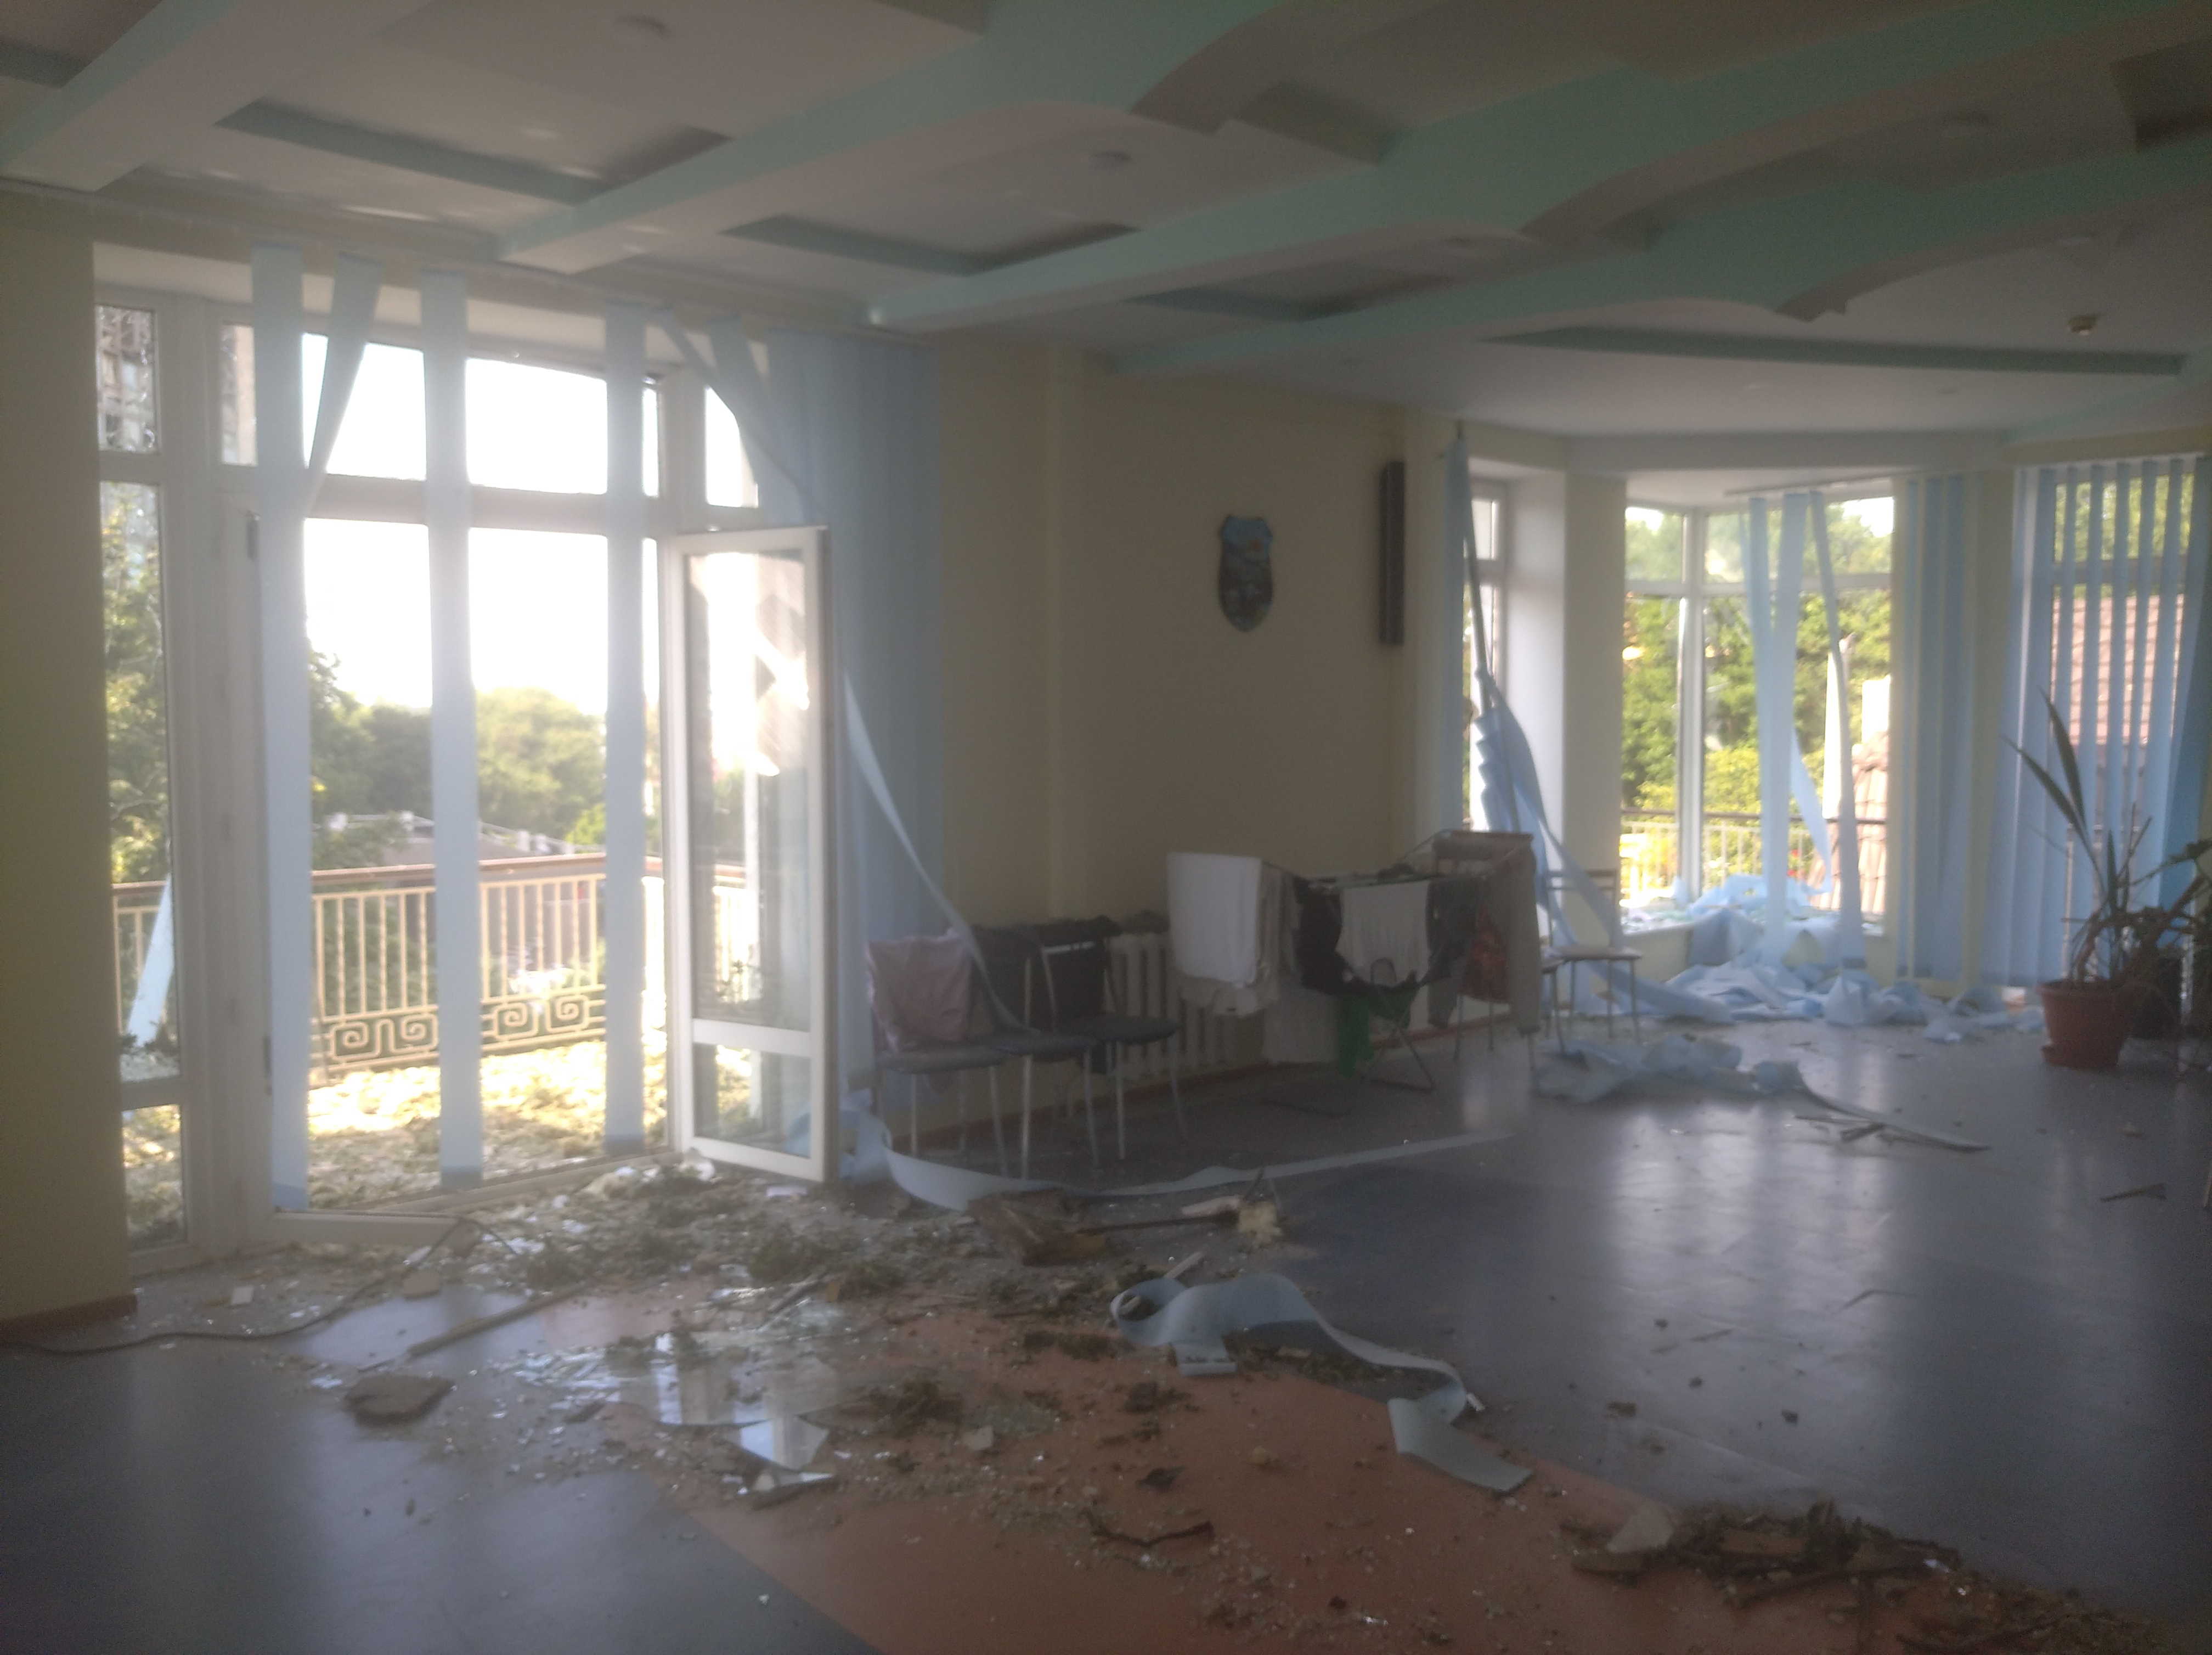 A picture of a large open room with the windows broken by gunfire and smashed glass and debris on the hardwood flooring